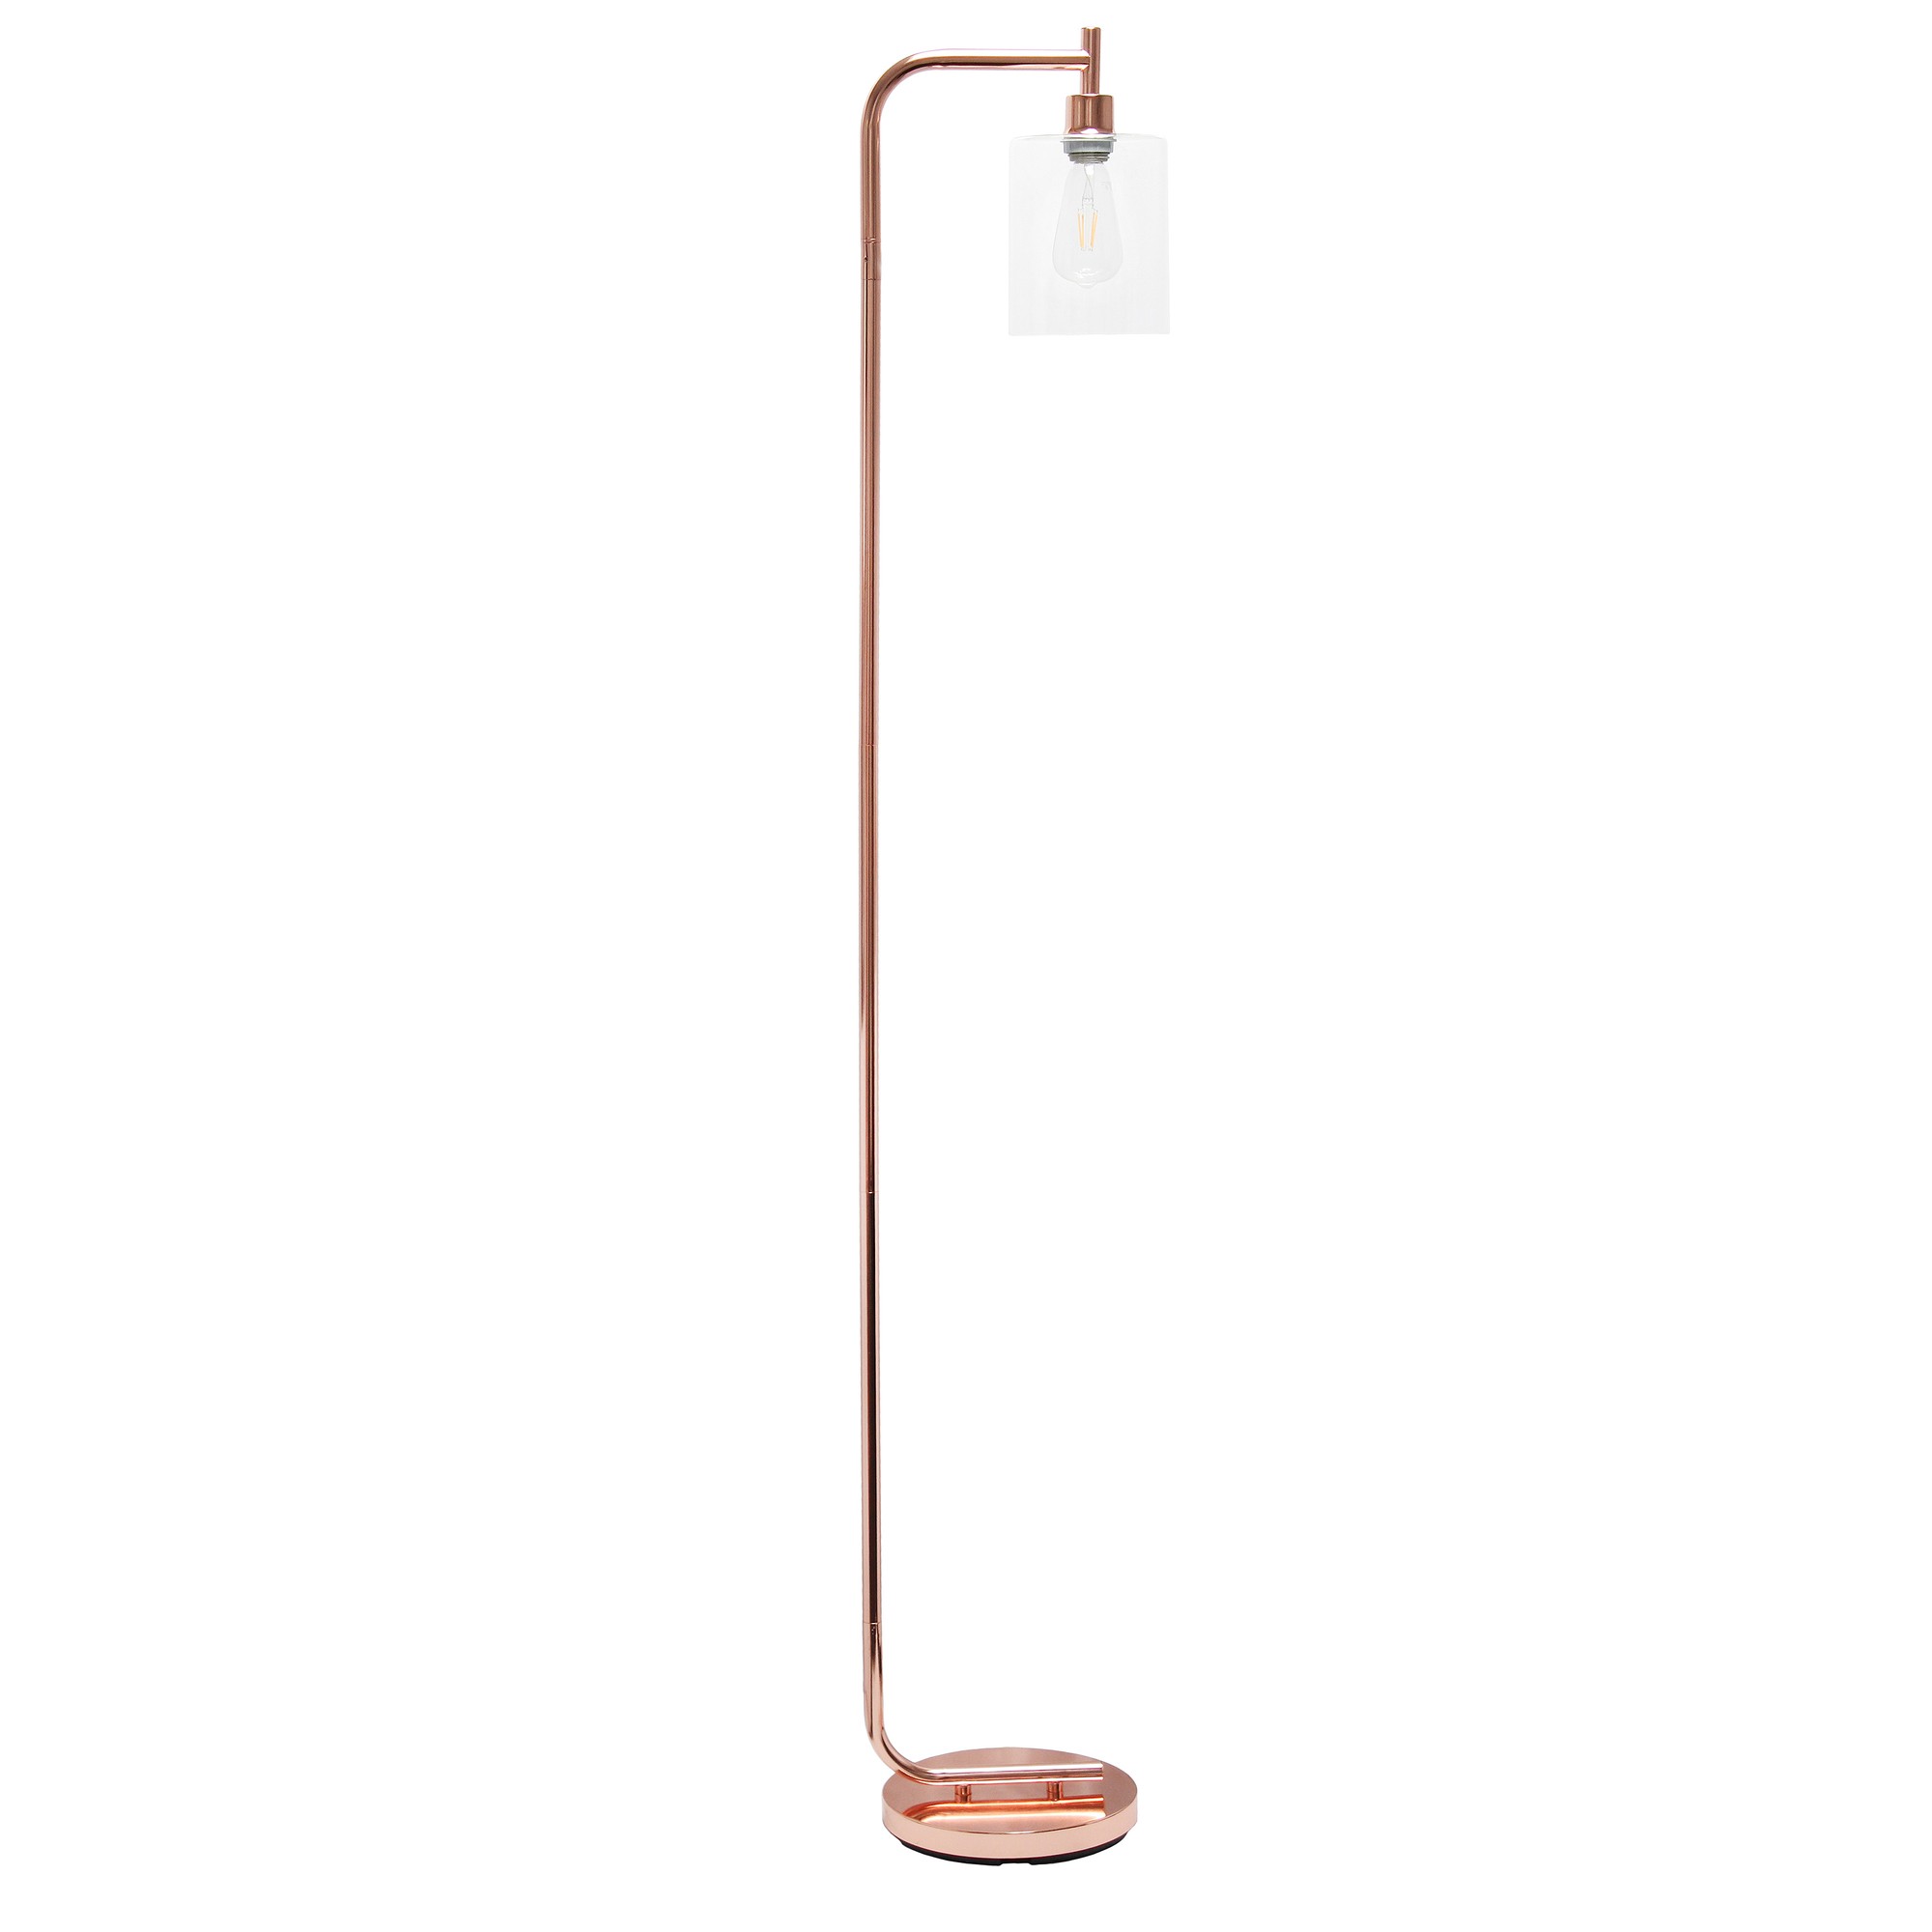 Simple Designs Modern Iron Lantern Floor Lamp with Glass Shade, Rose Gold